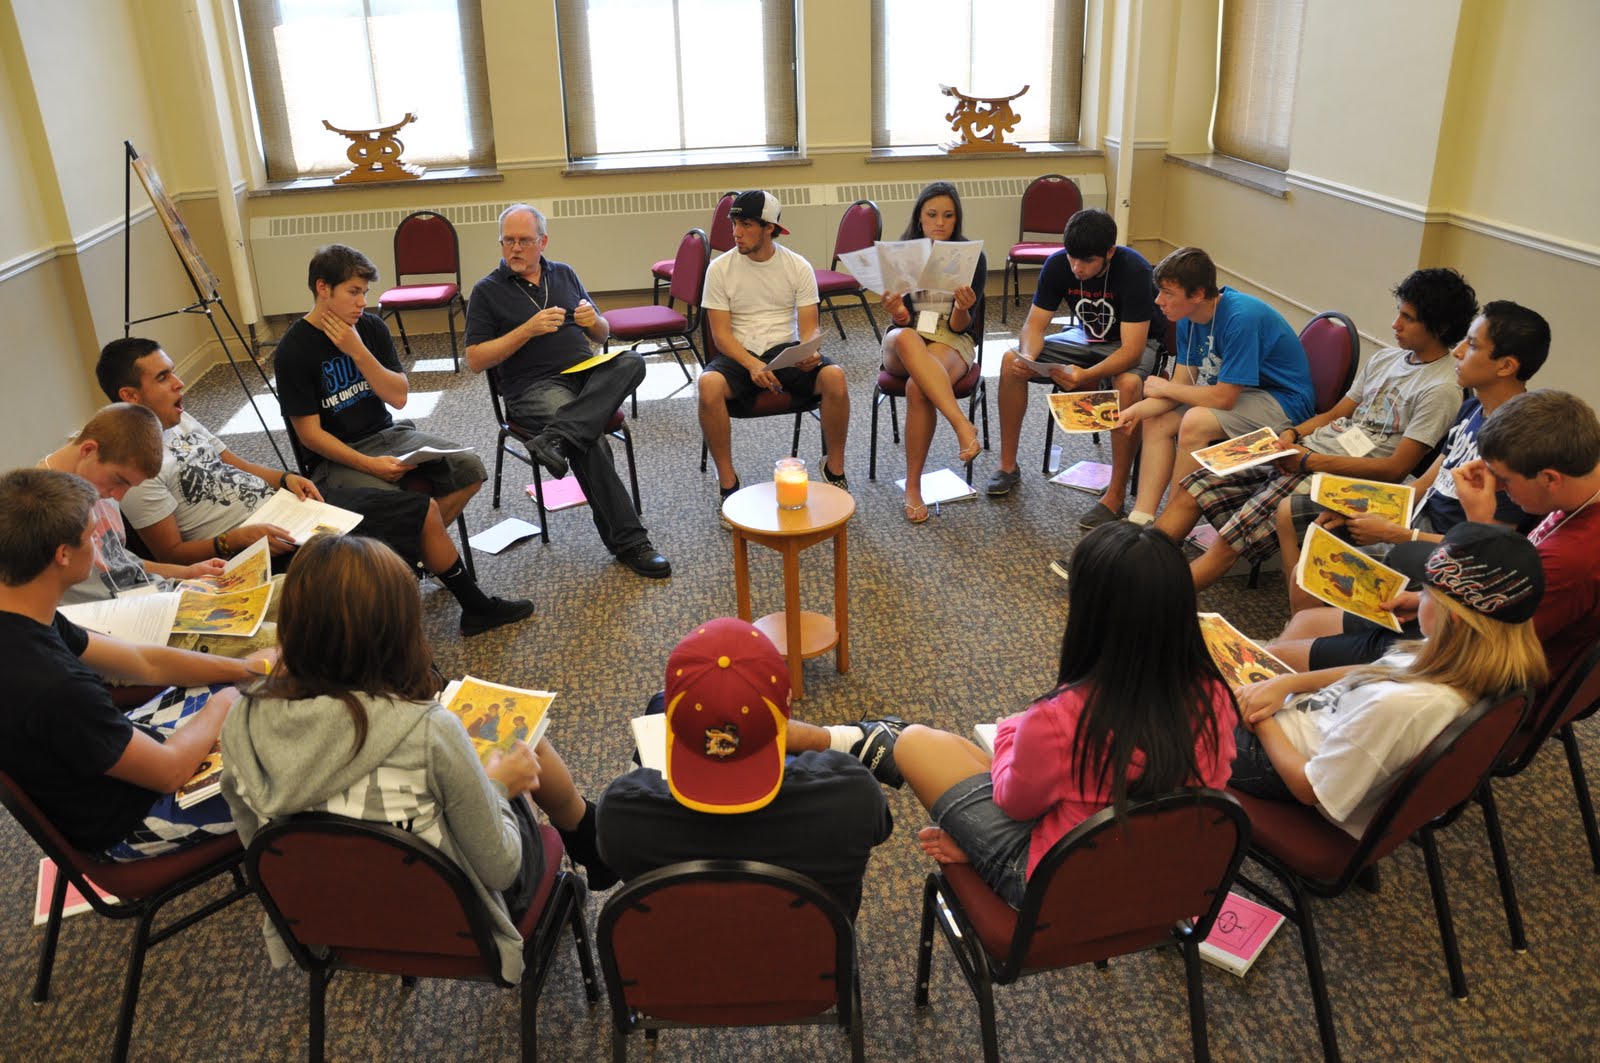 Br. Dan Lydon, CSV, leads one of the small group sessions.